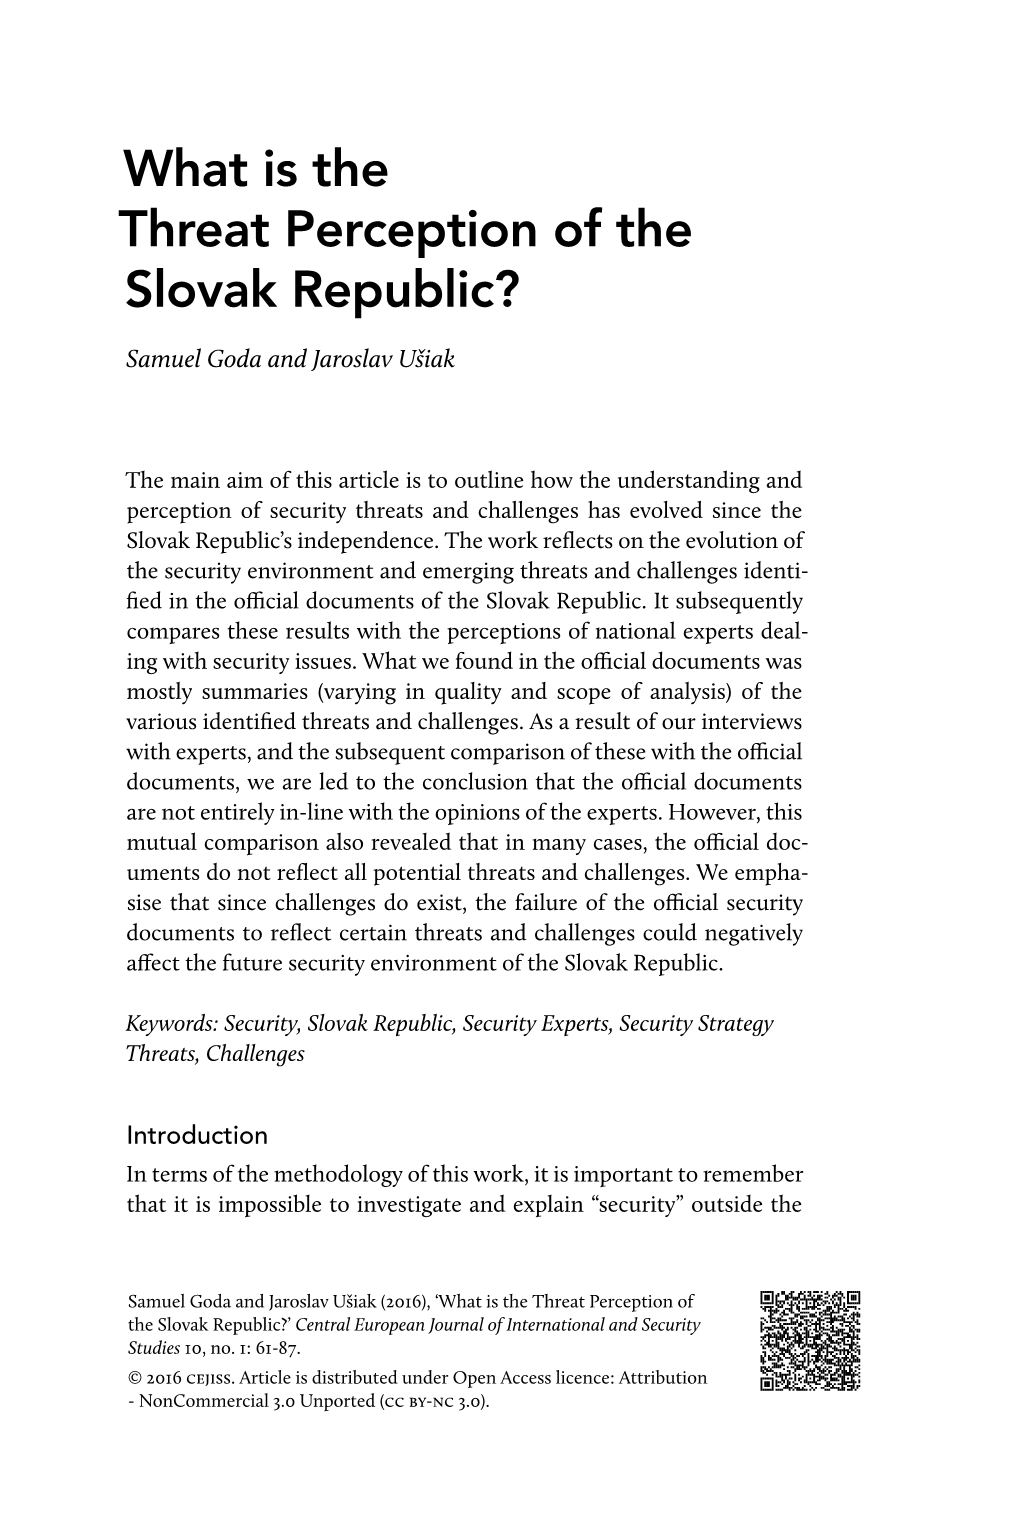 What Is the Threat Perception of the Slovak Republic?